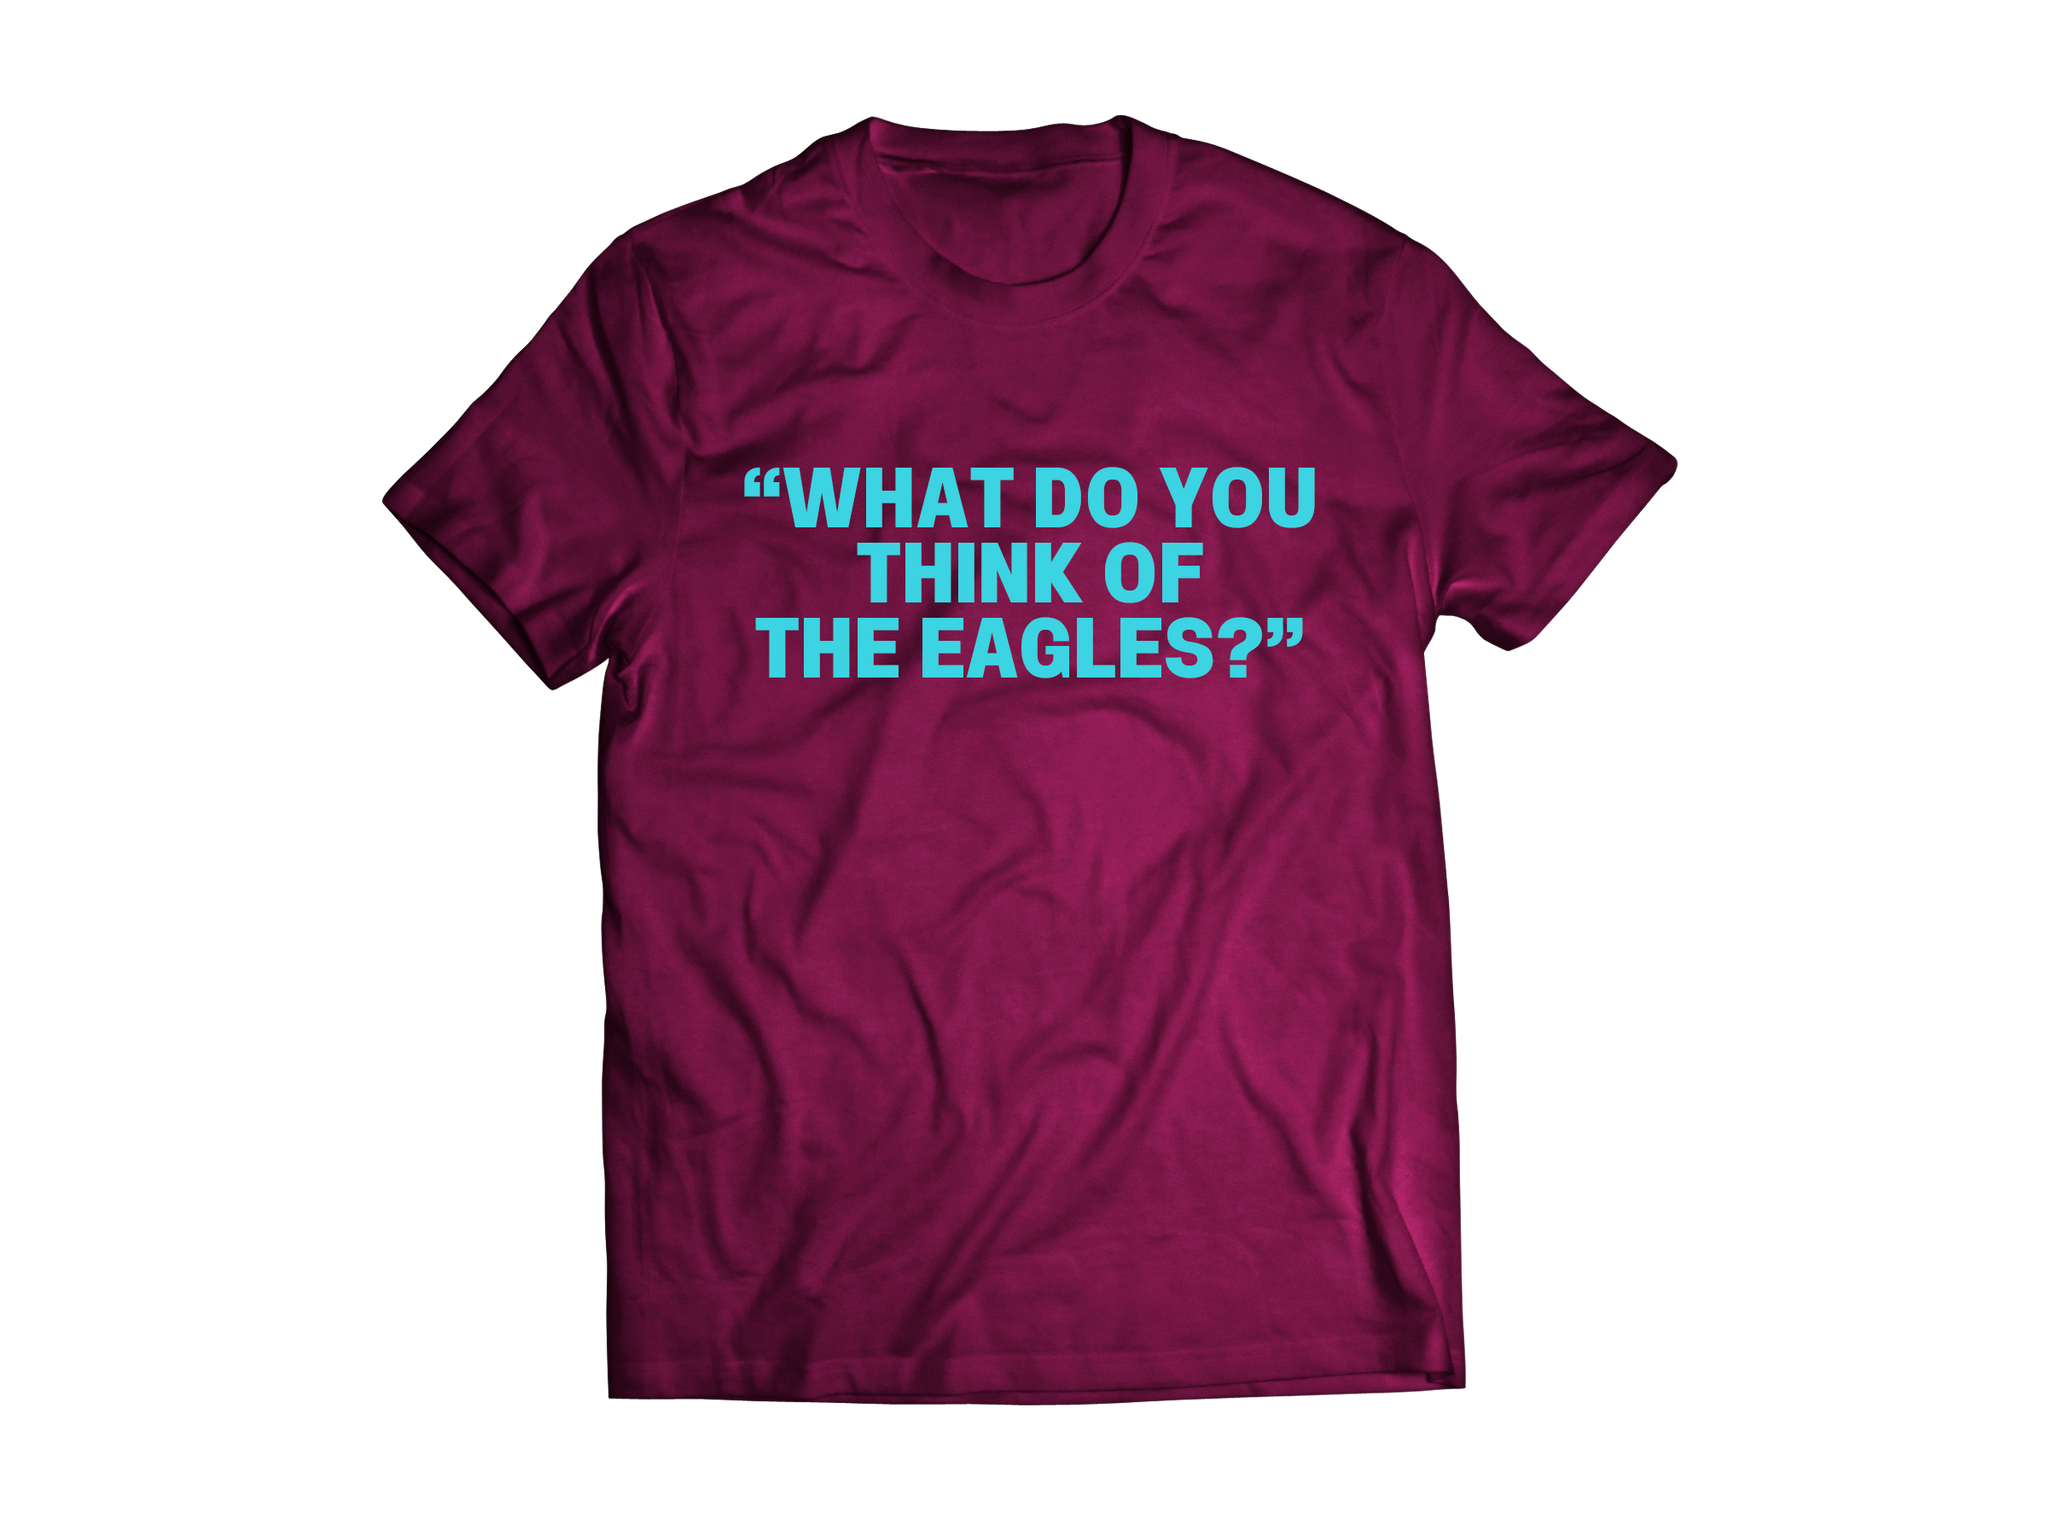 BRET EASTON ELLIS: "WHAT DO YOU THINK OF THE EAGLES?" MAROON T-SHIRT